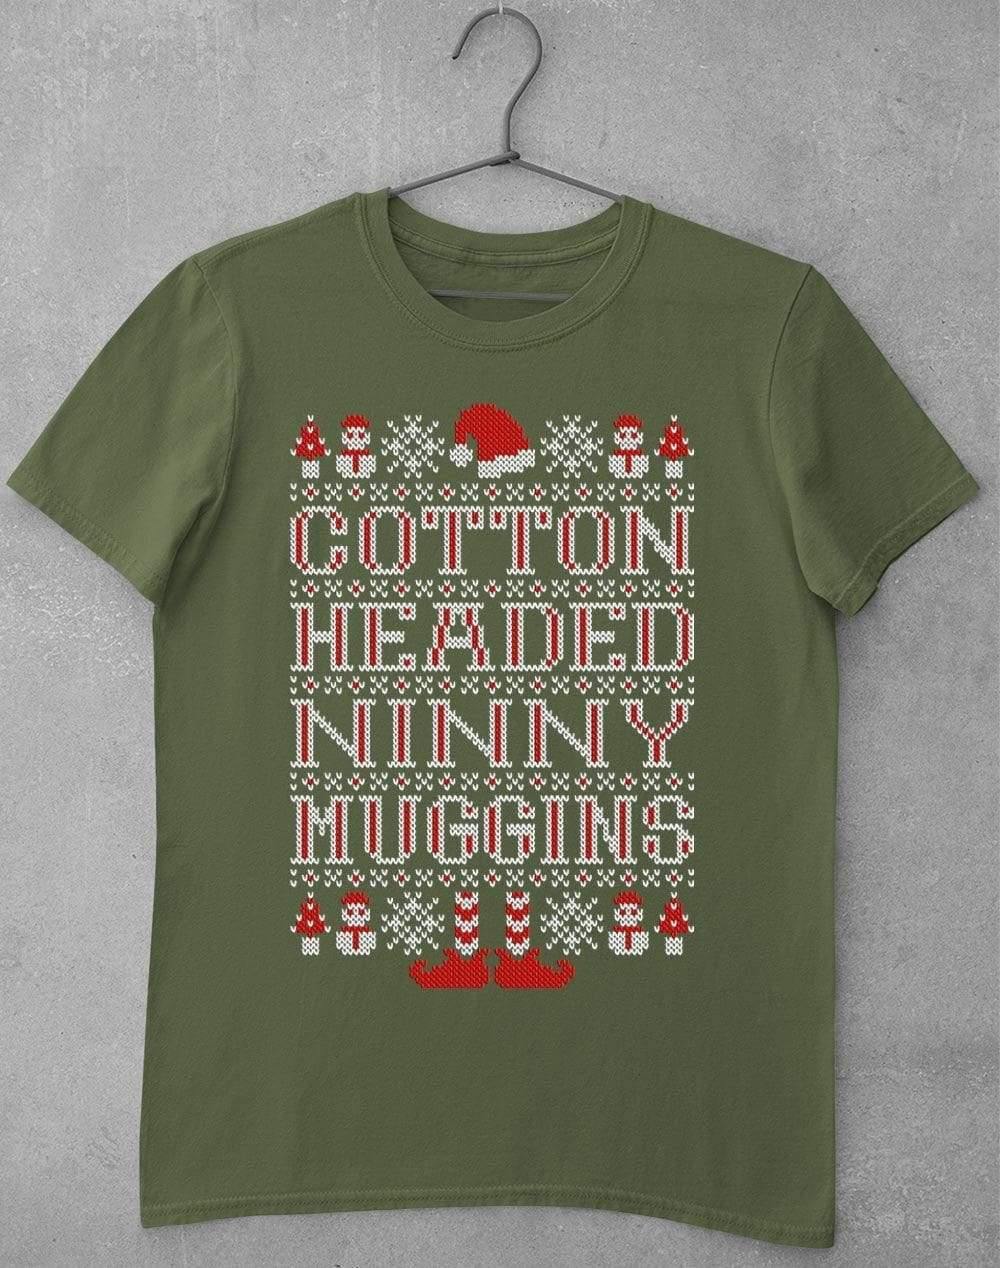 Cotton Headed Ninny Muggins Festive Knitted-Look T-Shirt S / Military Green  - Off World Tees